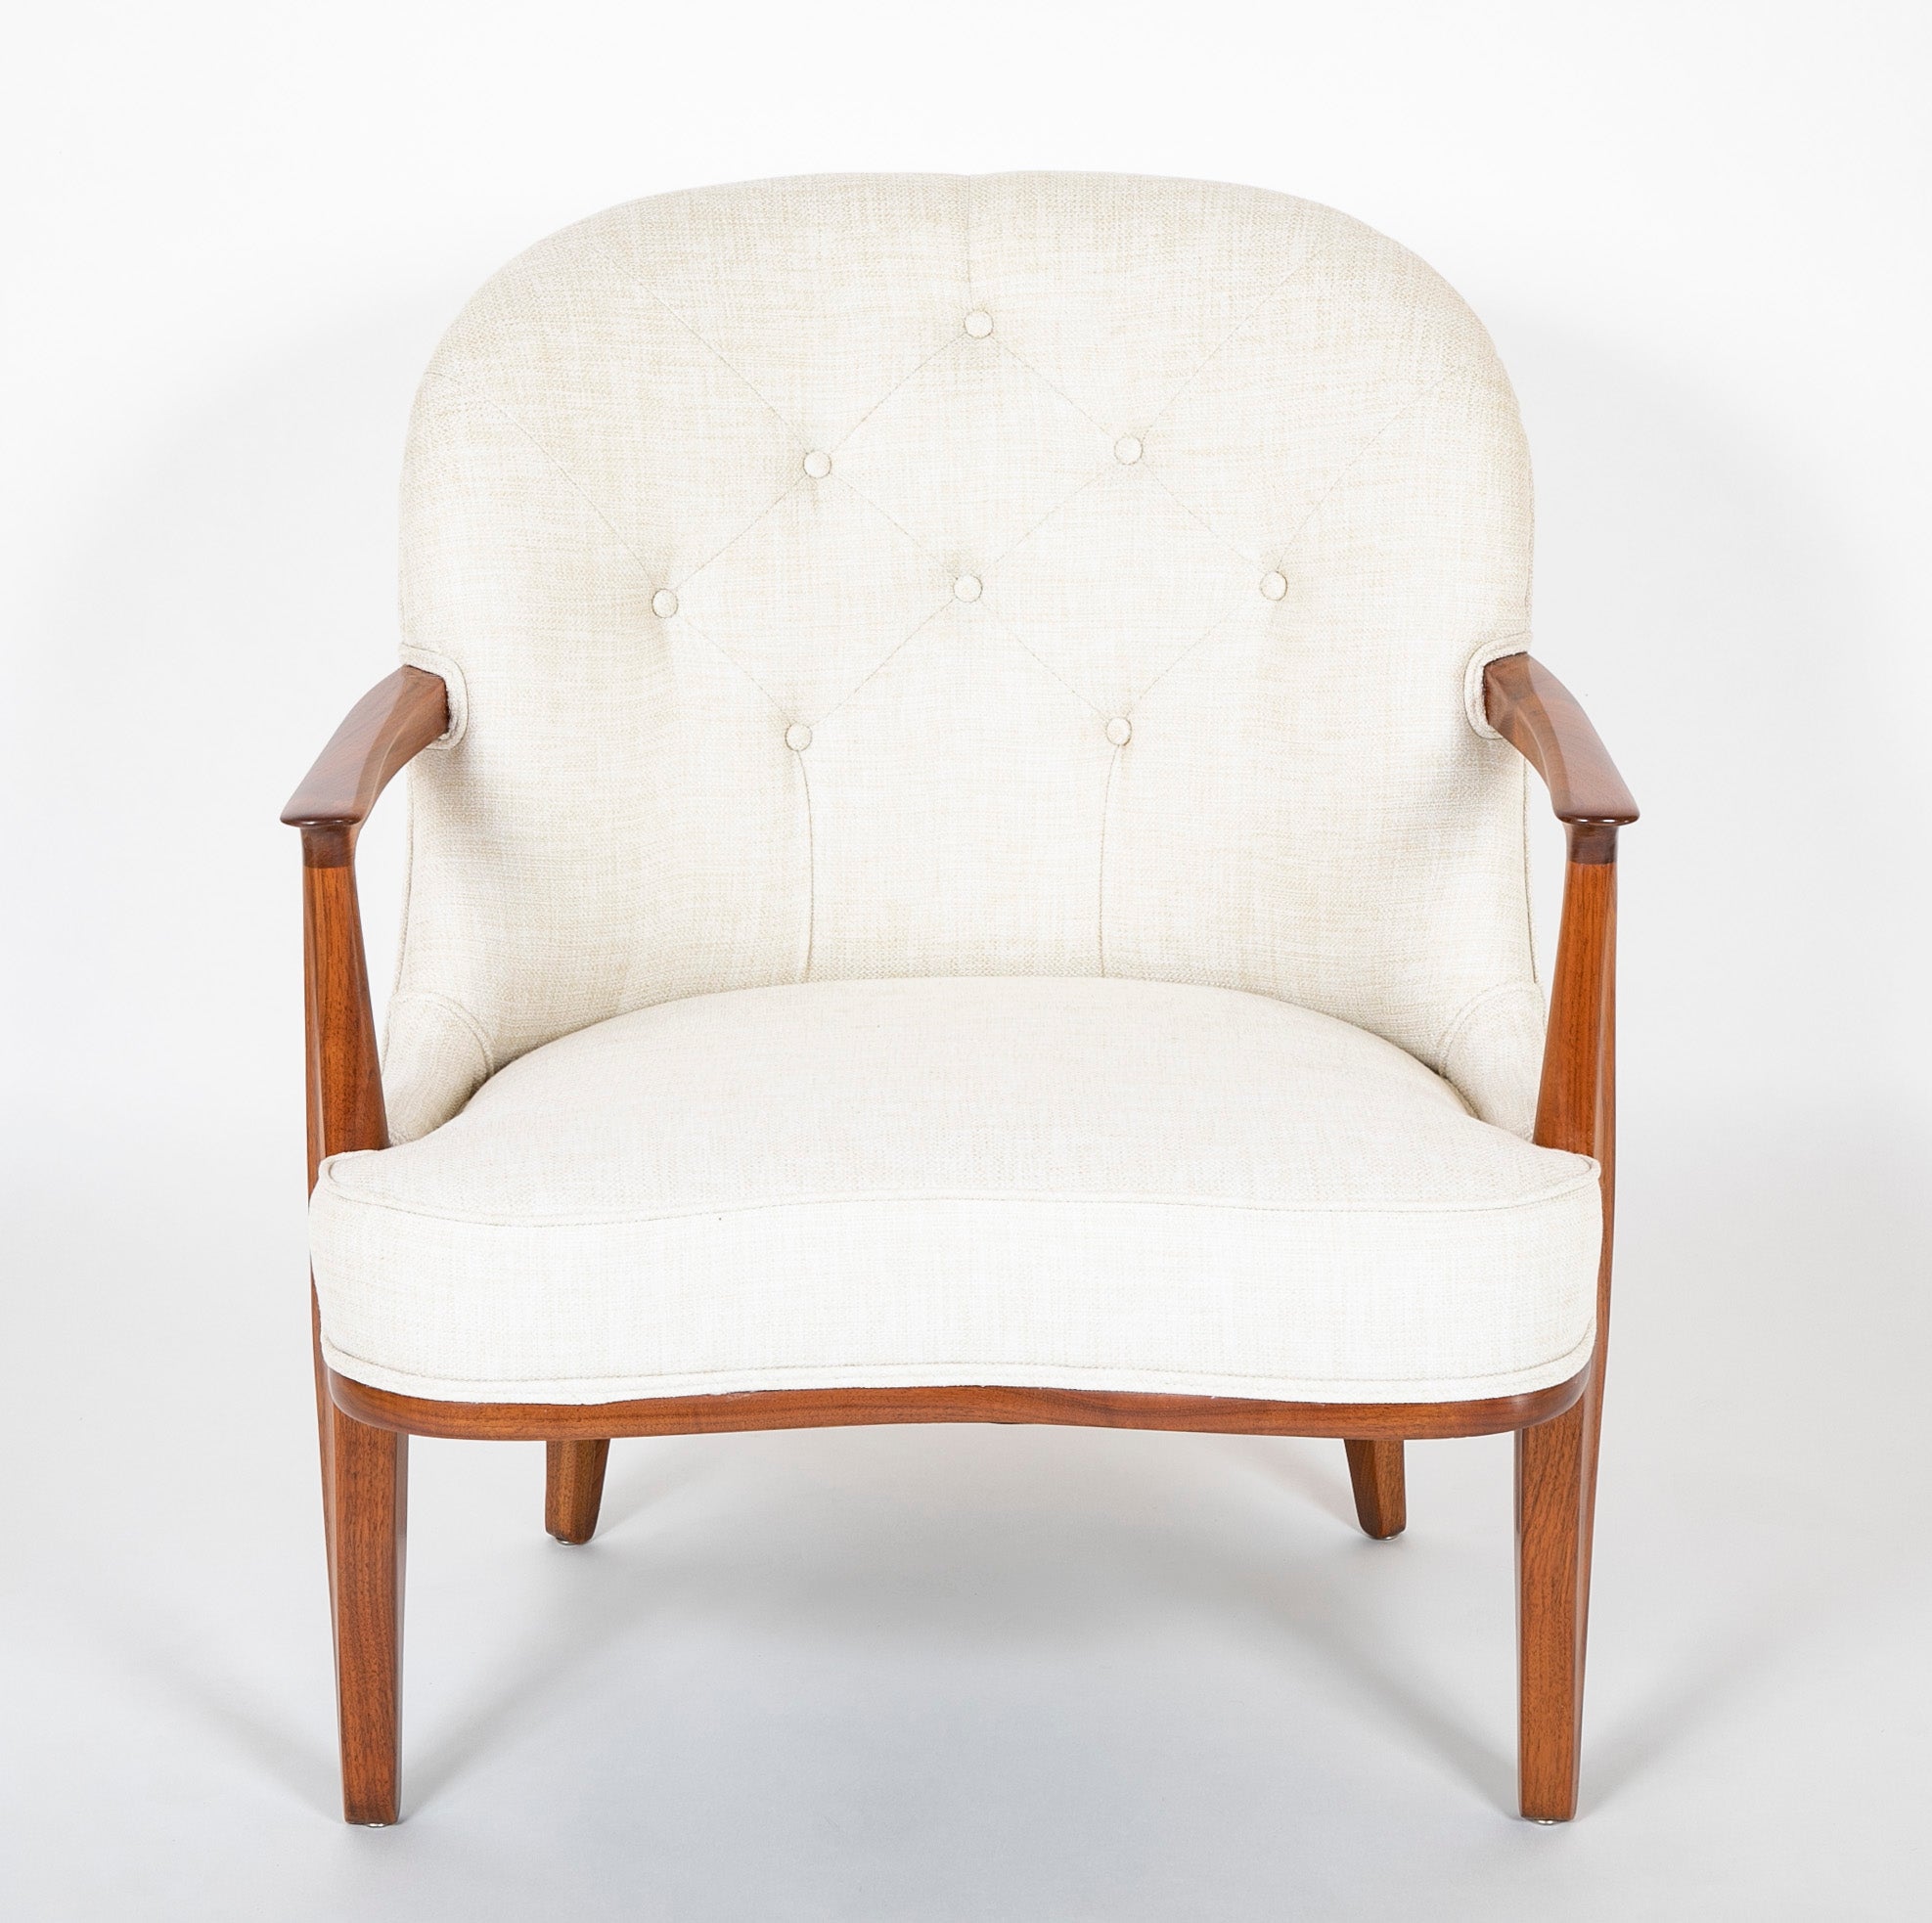 A Pair of Edward Wormley Tufted Armchairs from the Janus Collection